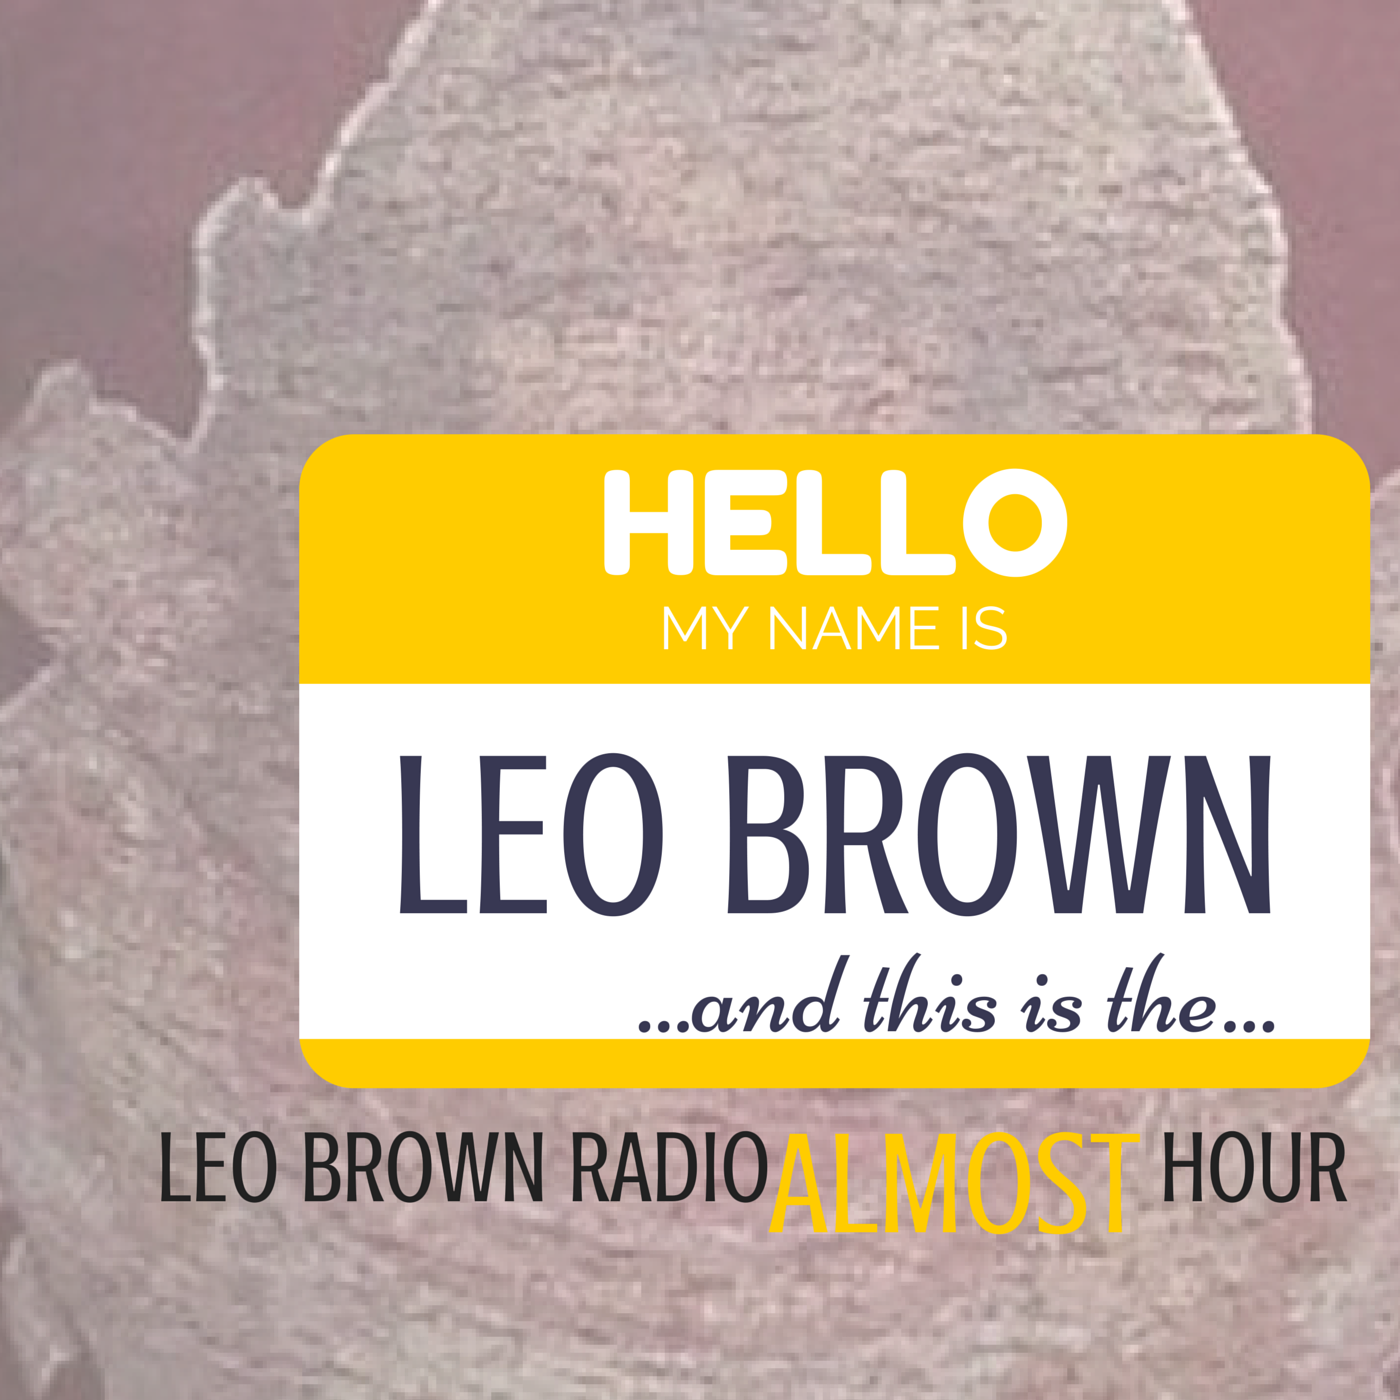 Leo Brown Almost Hour 4/4/17